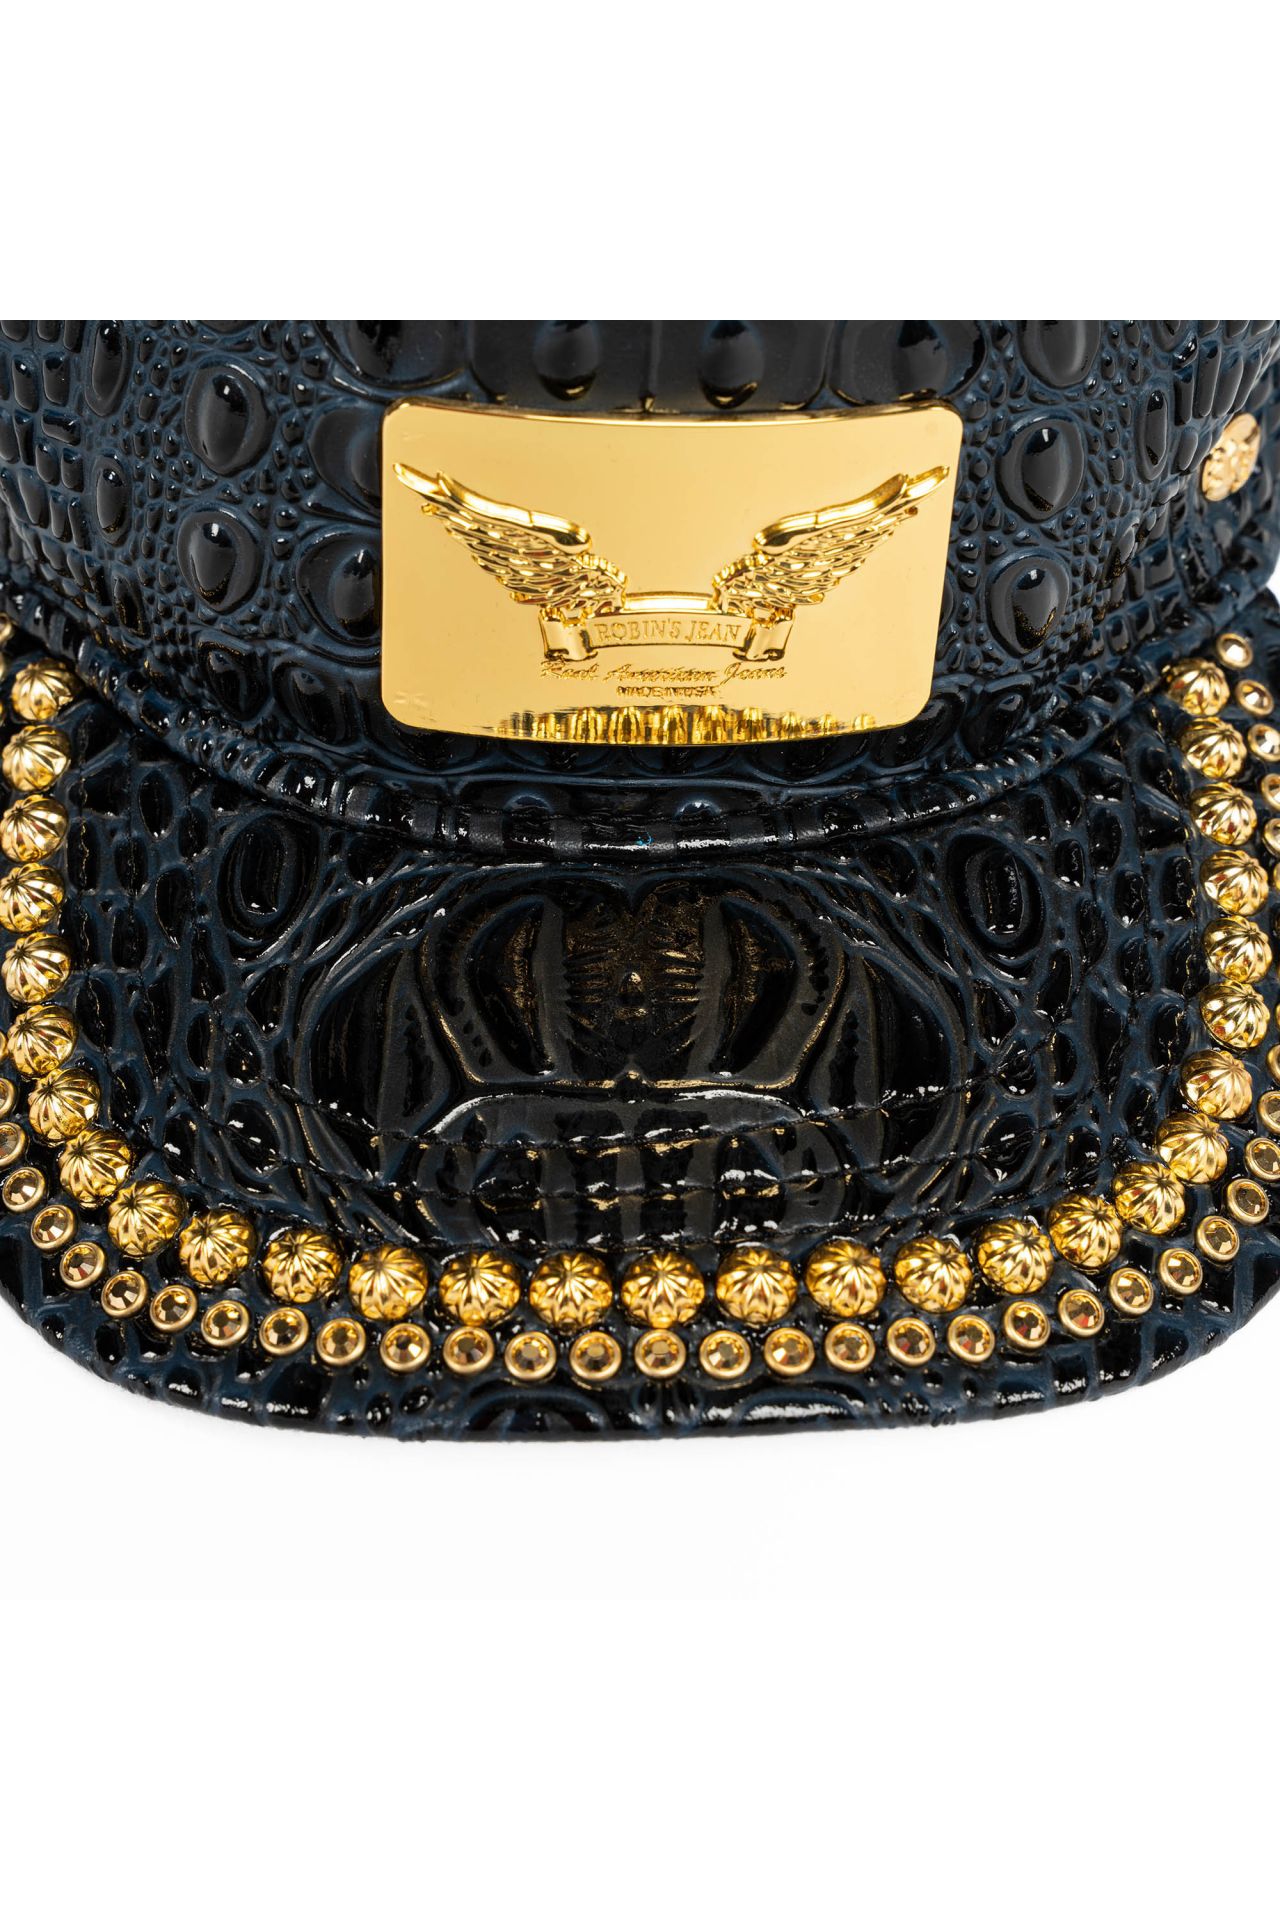 ROBIN'S GOLD TAG CAP IN NAVY CROC WITH STUDS AND CRYSTALS